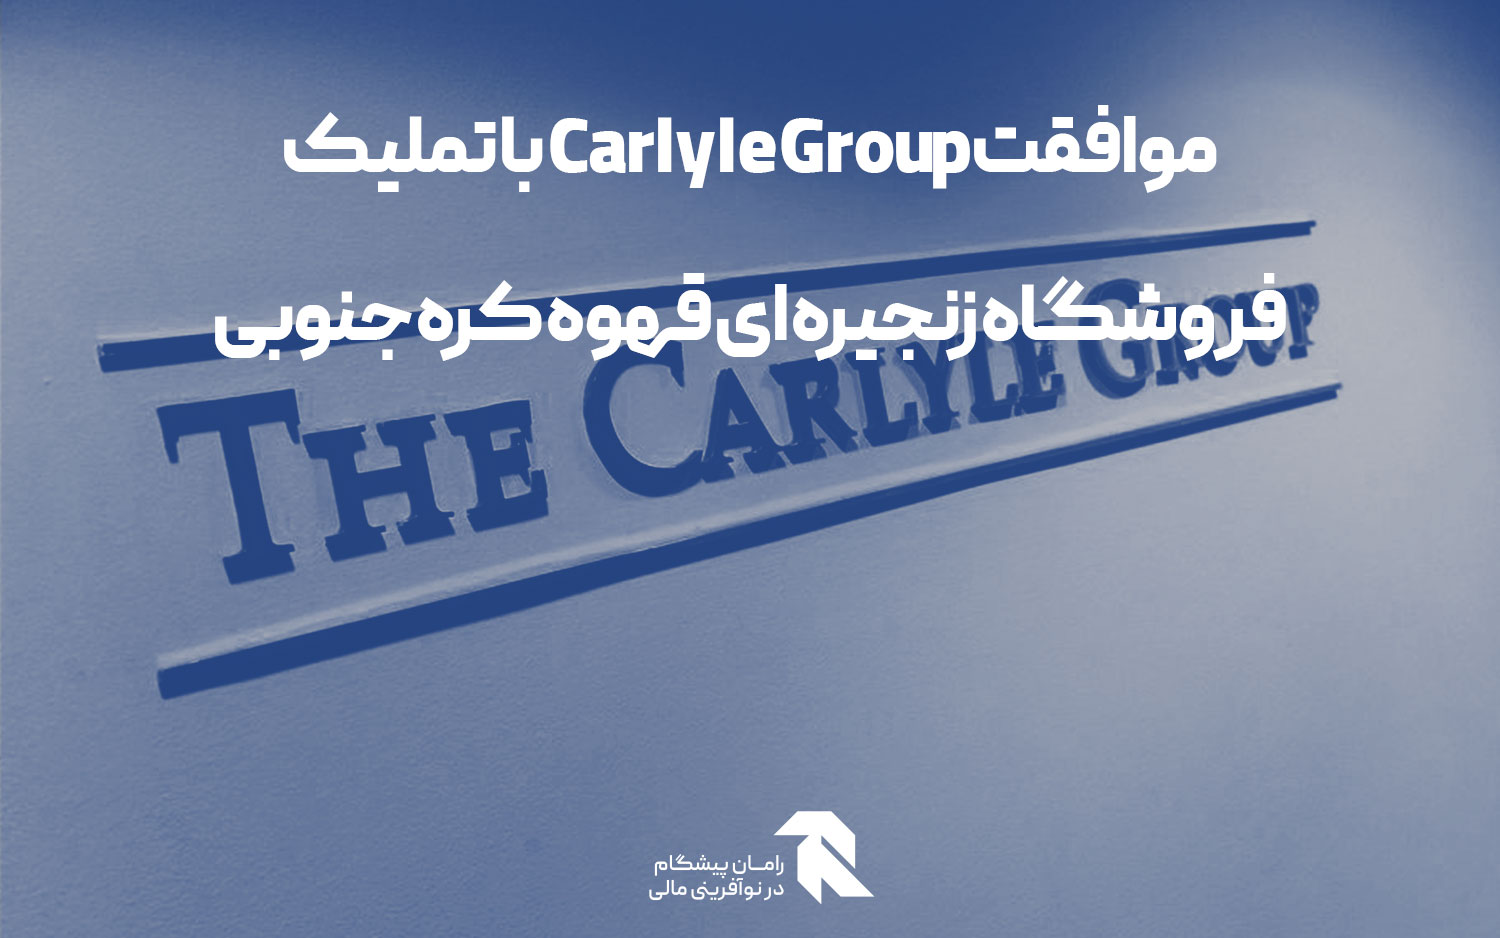 carlyle-agrees-buy-skorea-coffee-chain-pe-fund-anchor